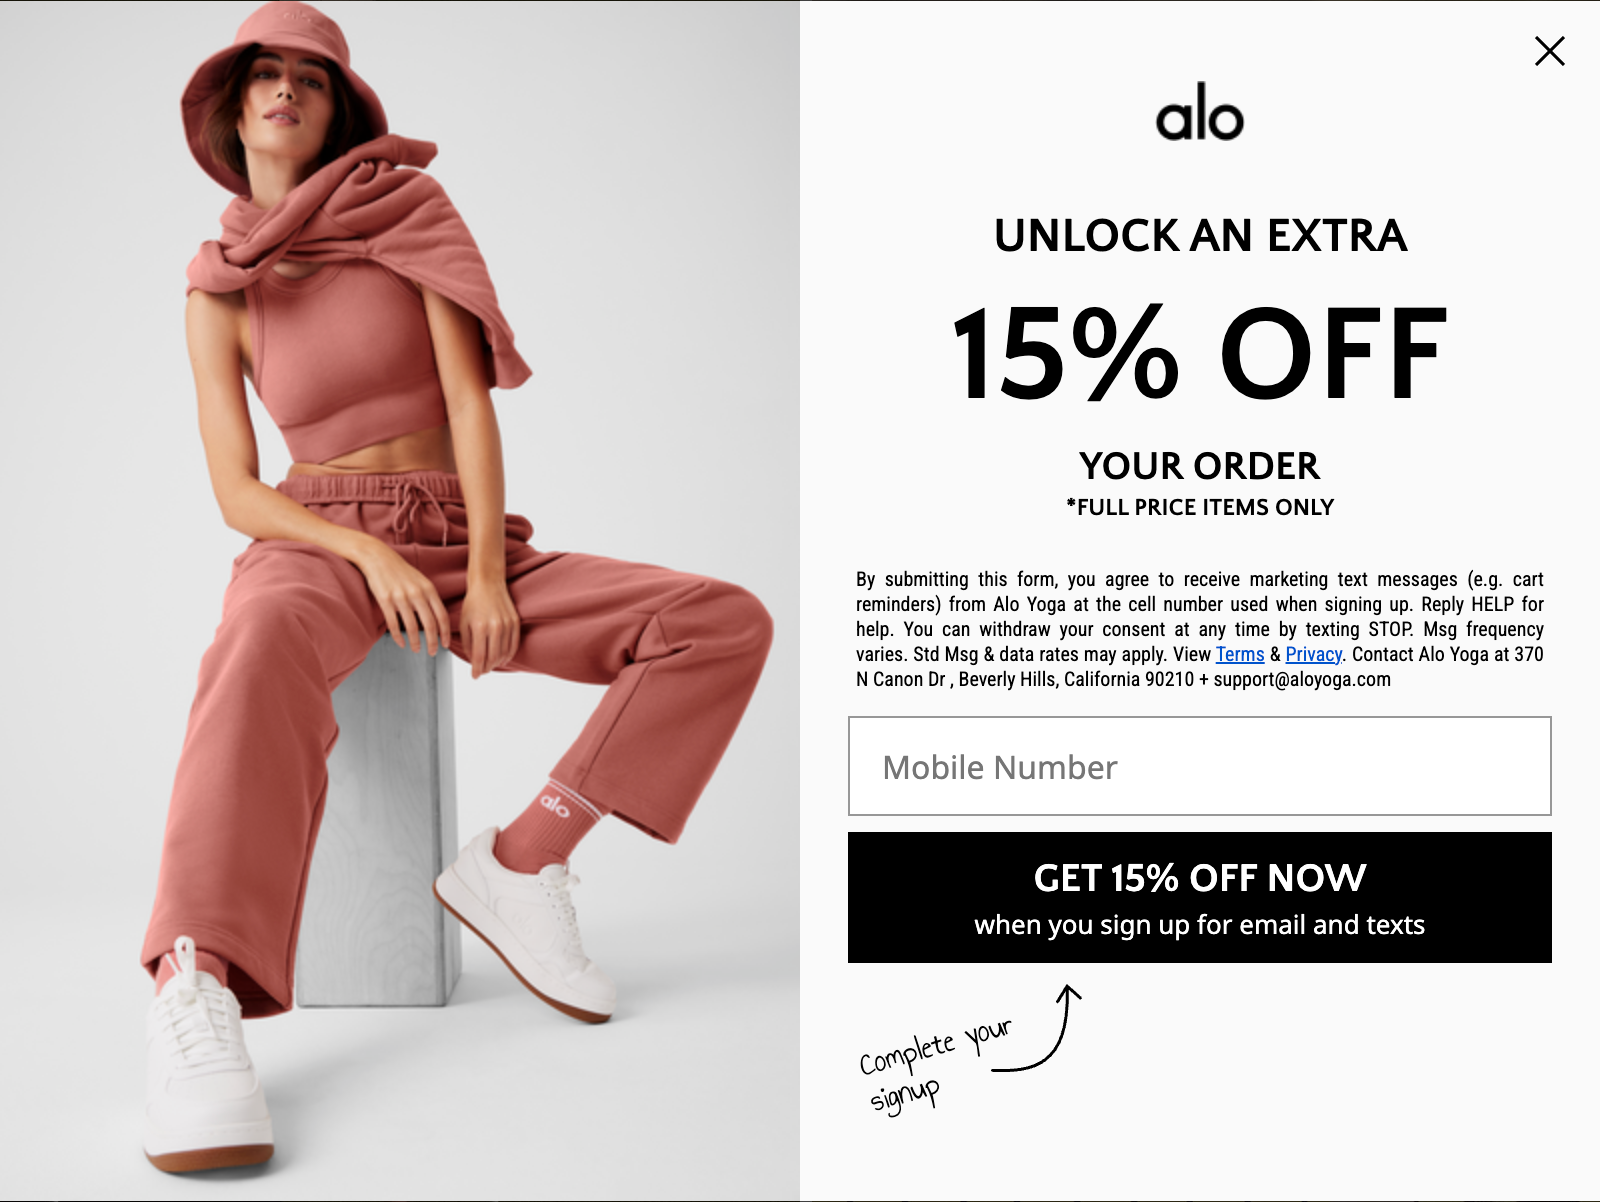 A pop-up advertises a 15% discount in exchange for a submitted mobile number.